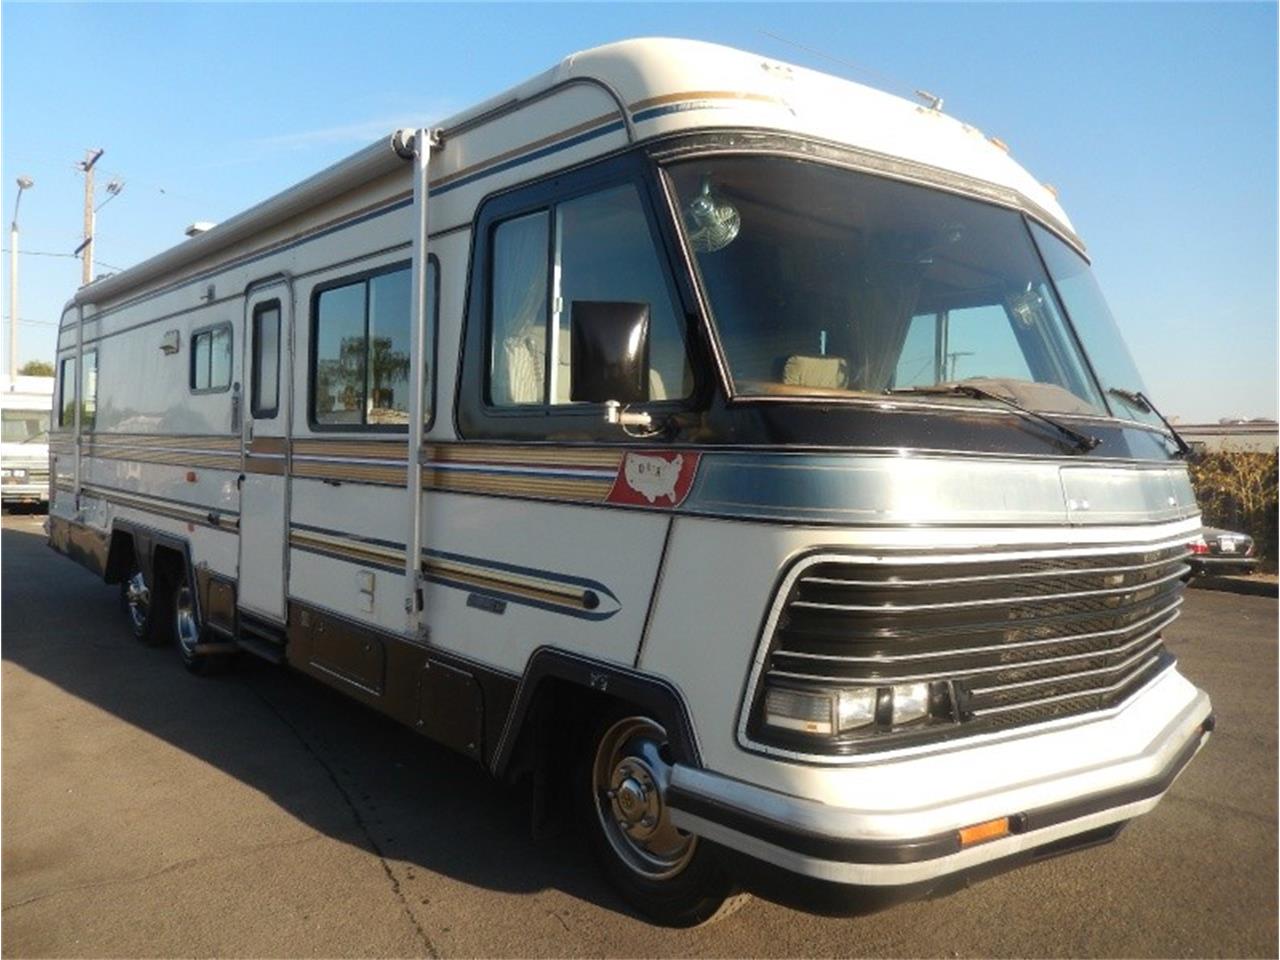 1986 Holiday Rambler IMPERIAL TAG AXLE for Sale | ClassicCars.com | CC ...